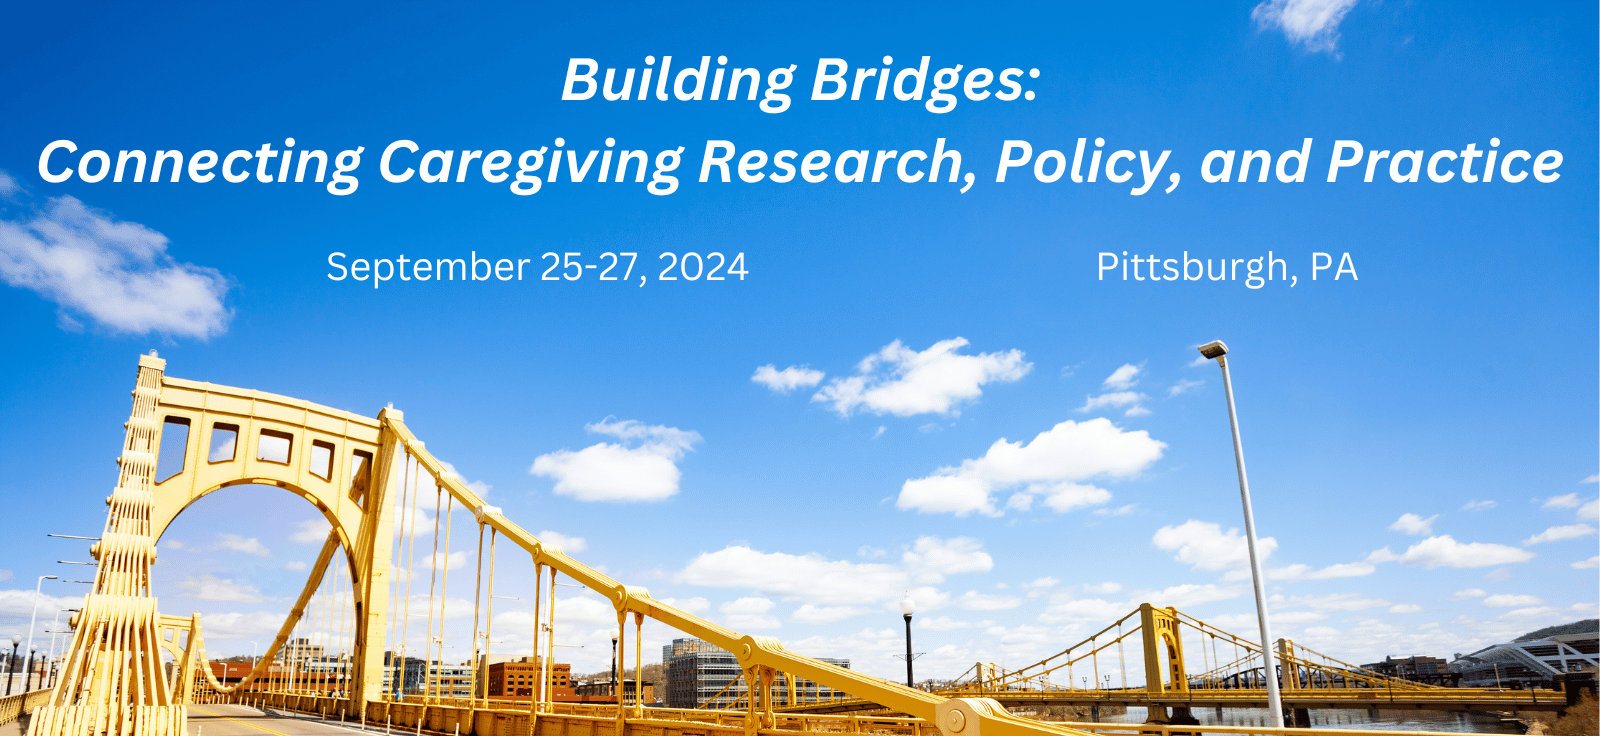 A yellow bridge and blue sky with text reading "Building Bridges: Connecting Caregiving Research, Policy, and Practice" and "September 25-27, 2024" "Pittsburgh, PA"